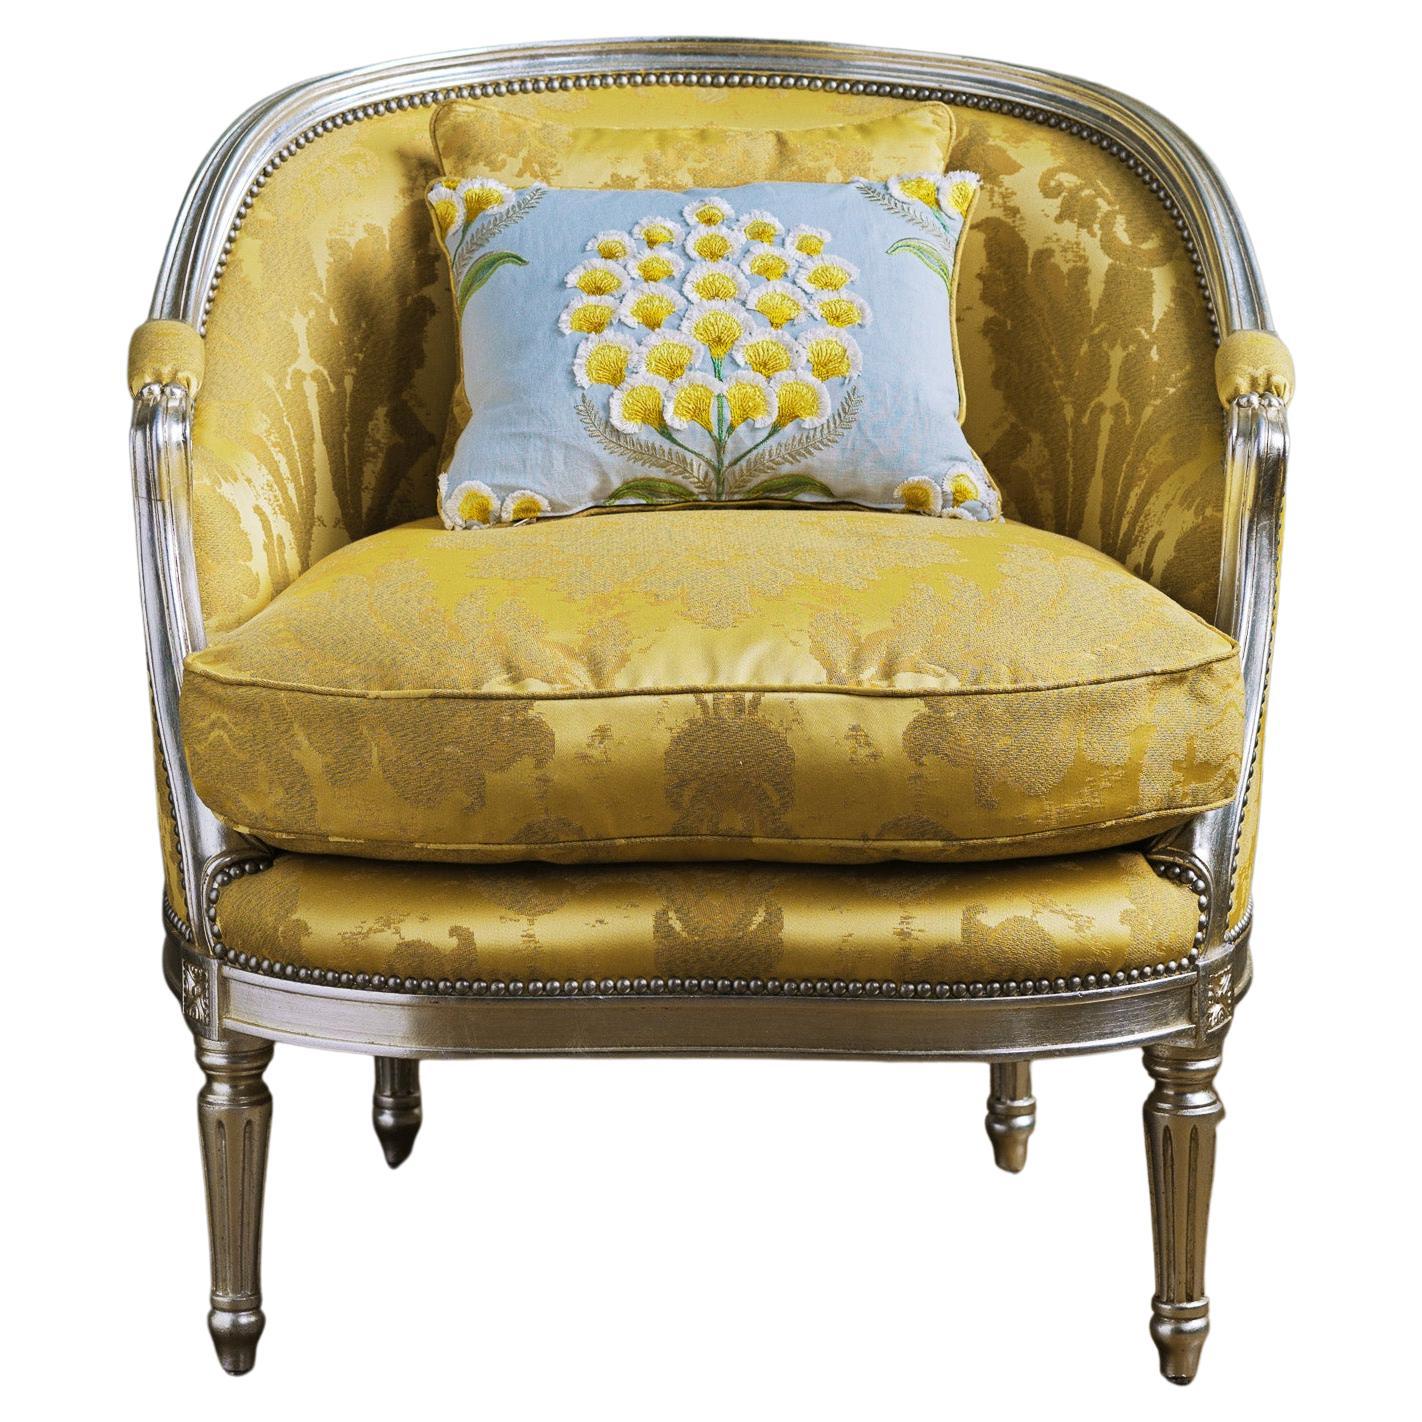 Louis XVI A Silver Gilt Wood Hollywood Regency Style Marquise Armchair For Sale